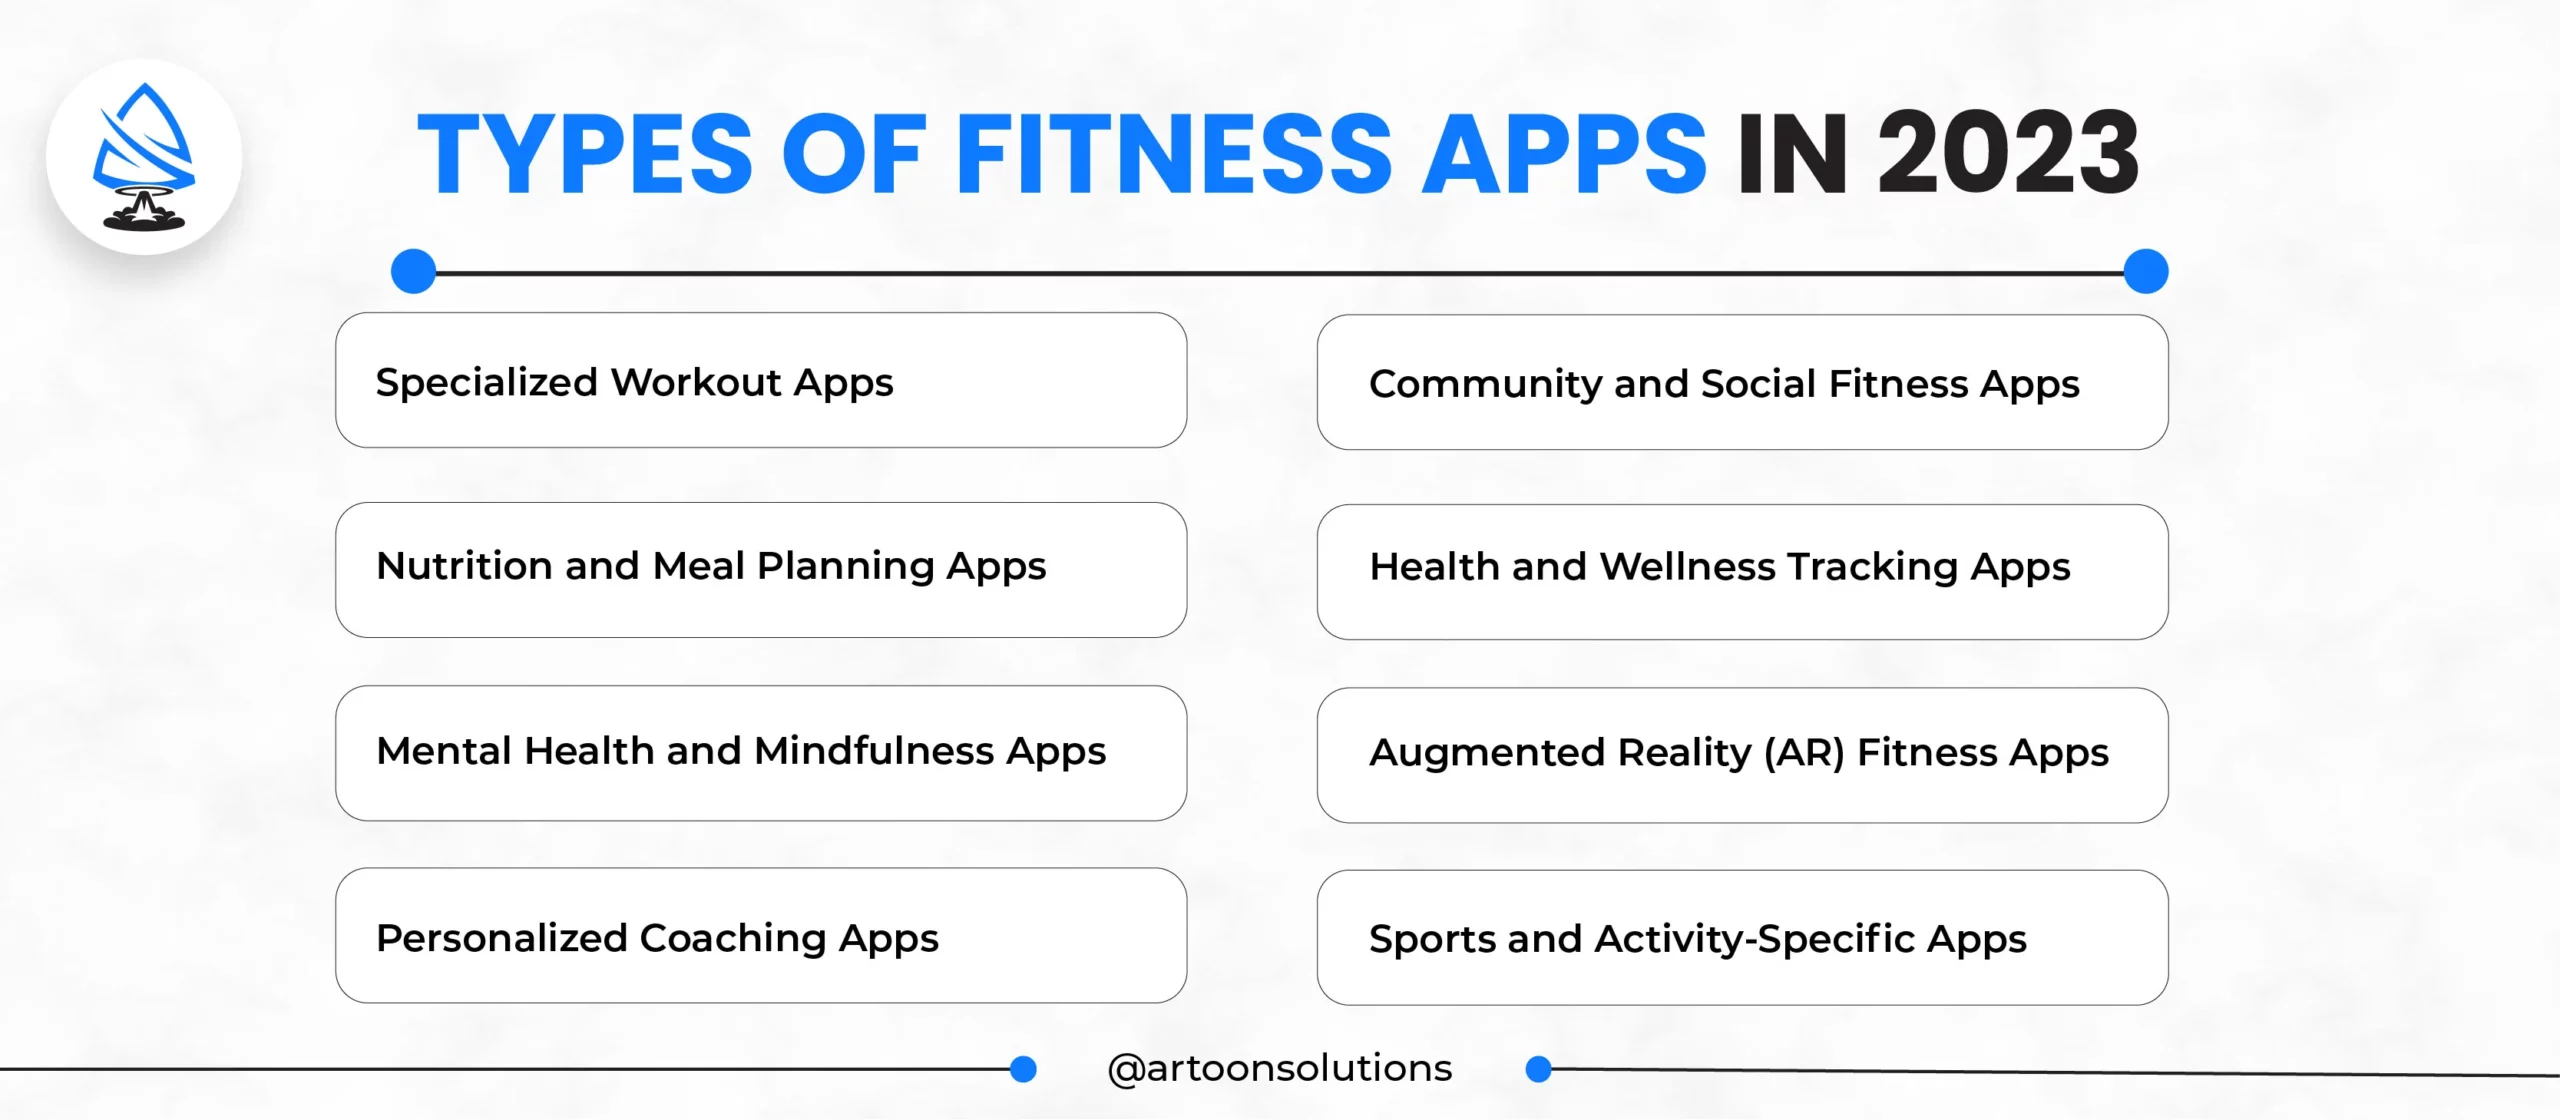 Types of Fitness Apps in 2023